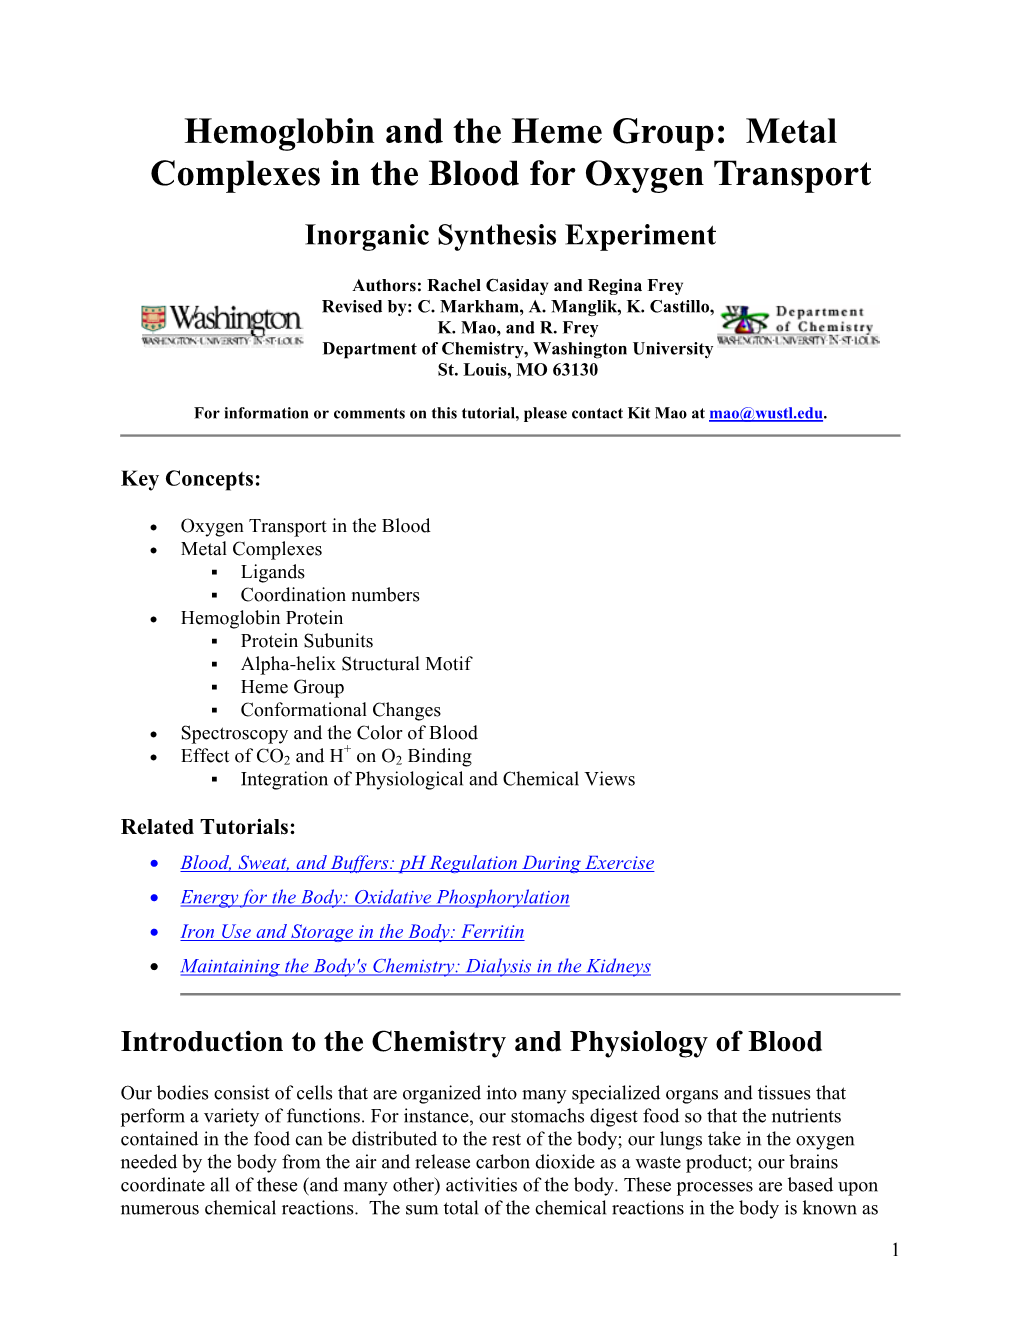 Hemoglobin and the Heme Group: Metal Complexes in the Blood for Oxygen Transport Inorganic Synthesis Experiment